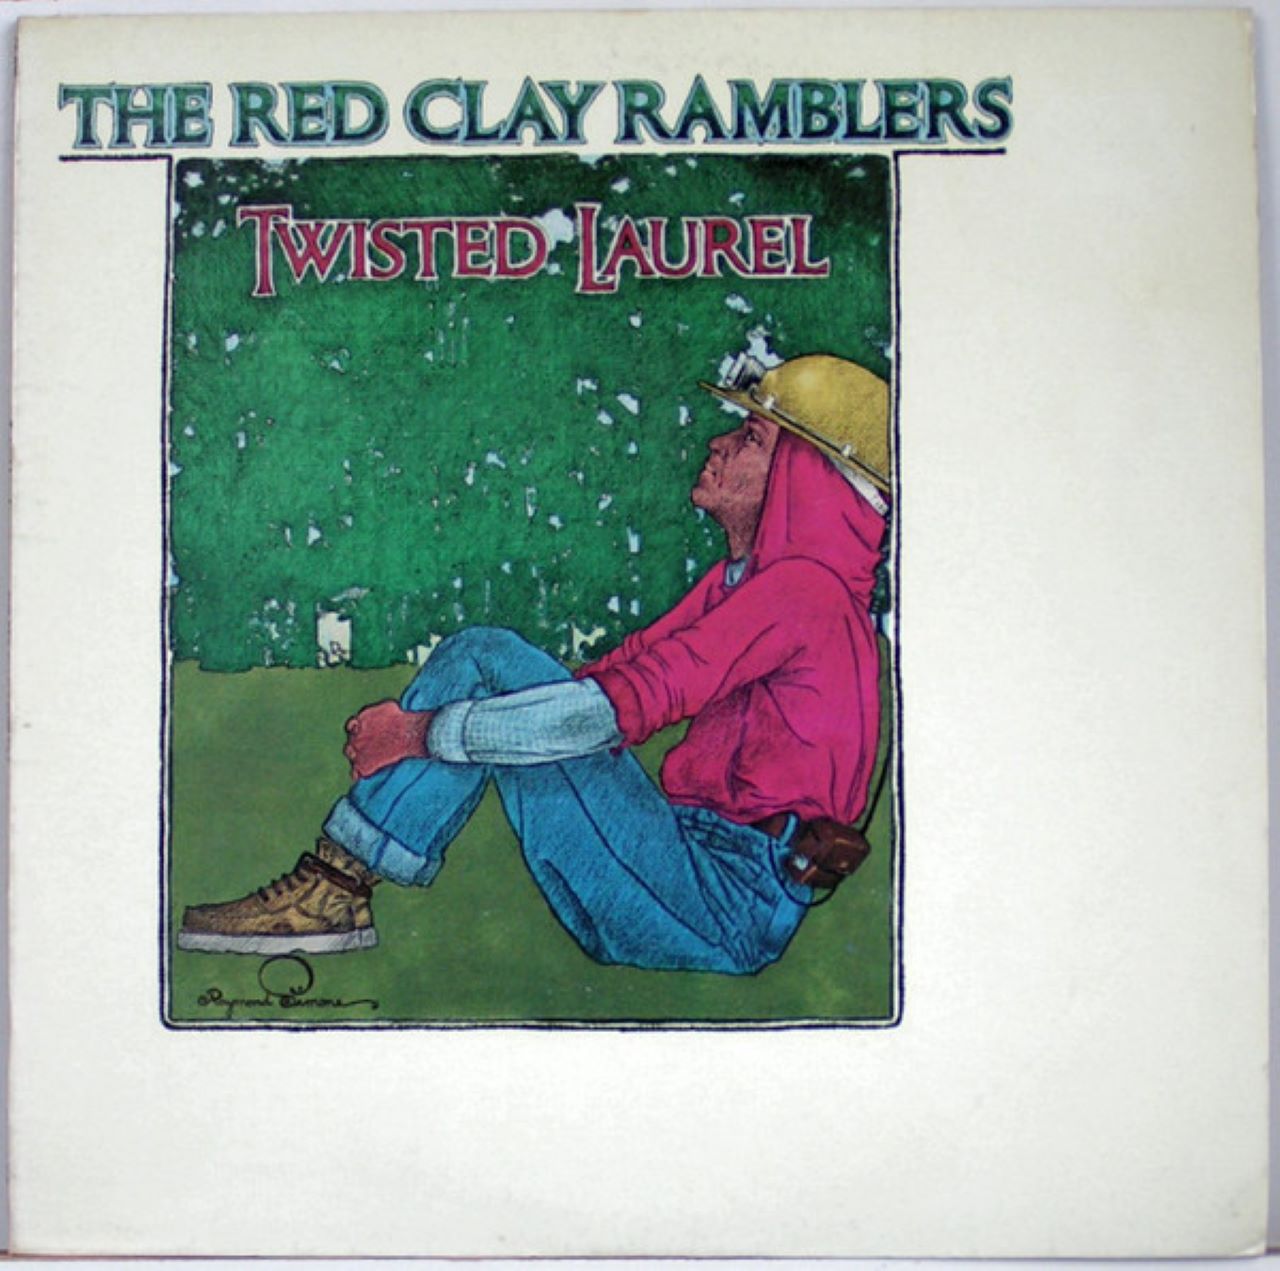 Red Clay Ramblers - Twisted Laurel cover album